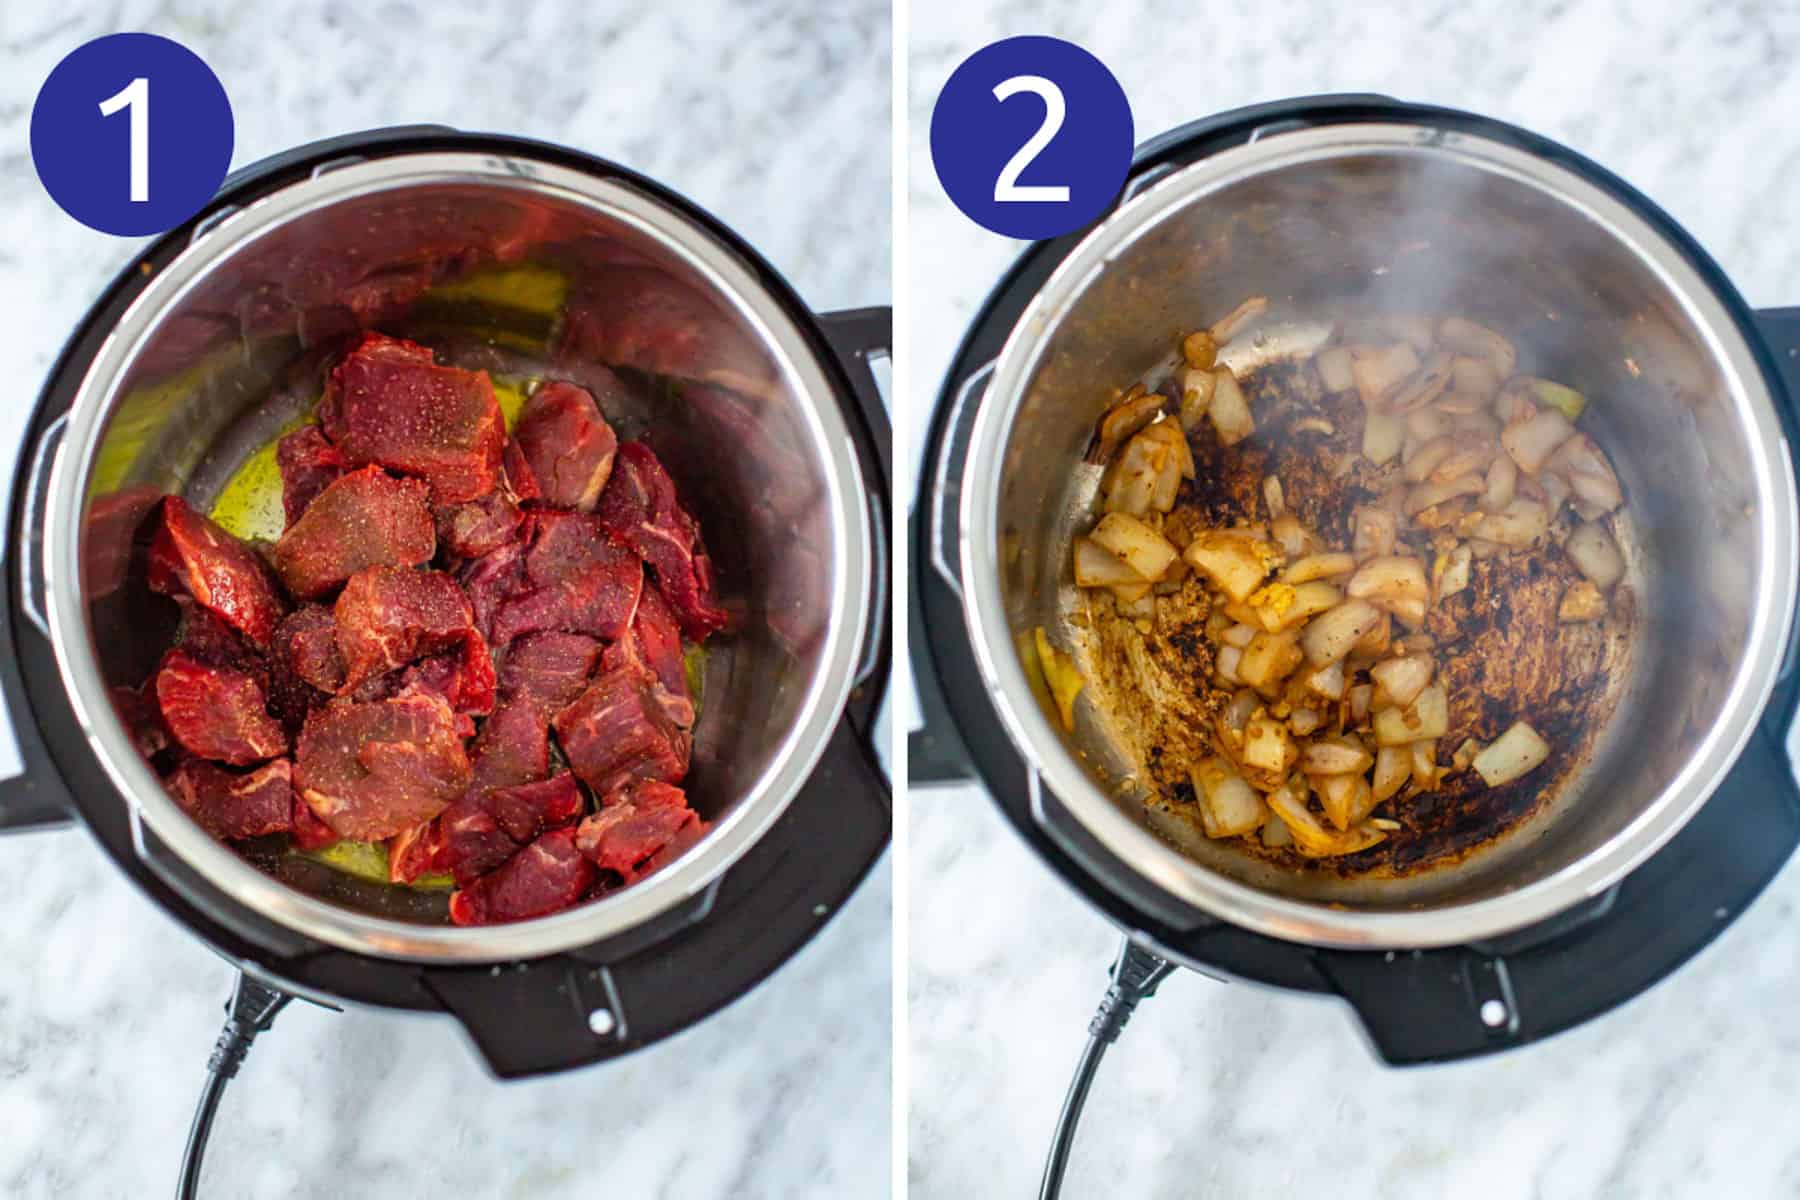 Steps 1 and 2 for making Instant Pot beef stew: Sear beef then saute onions.